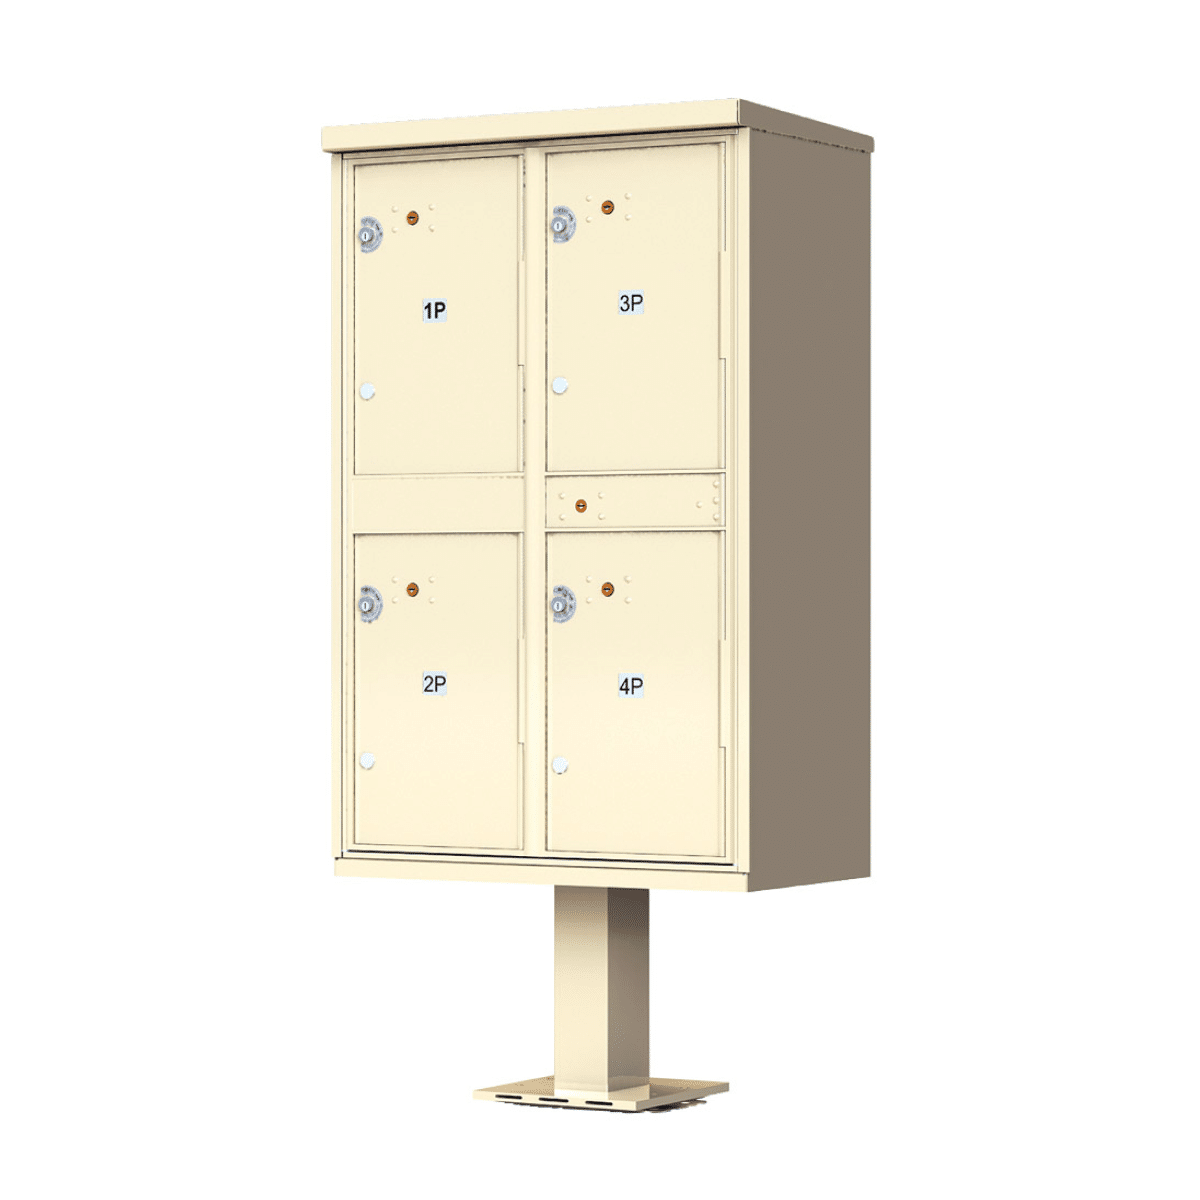 Florence CBU Cluster Mailbox – 4 Parcel Lockers Product Image